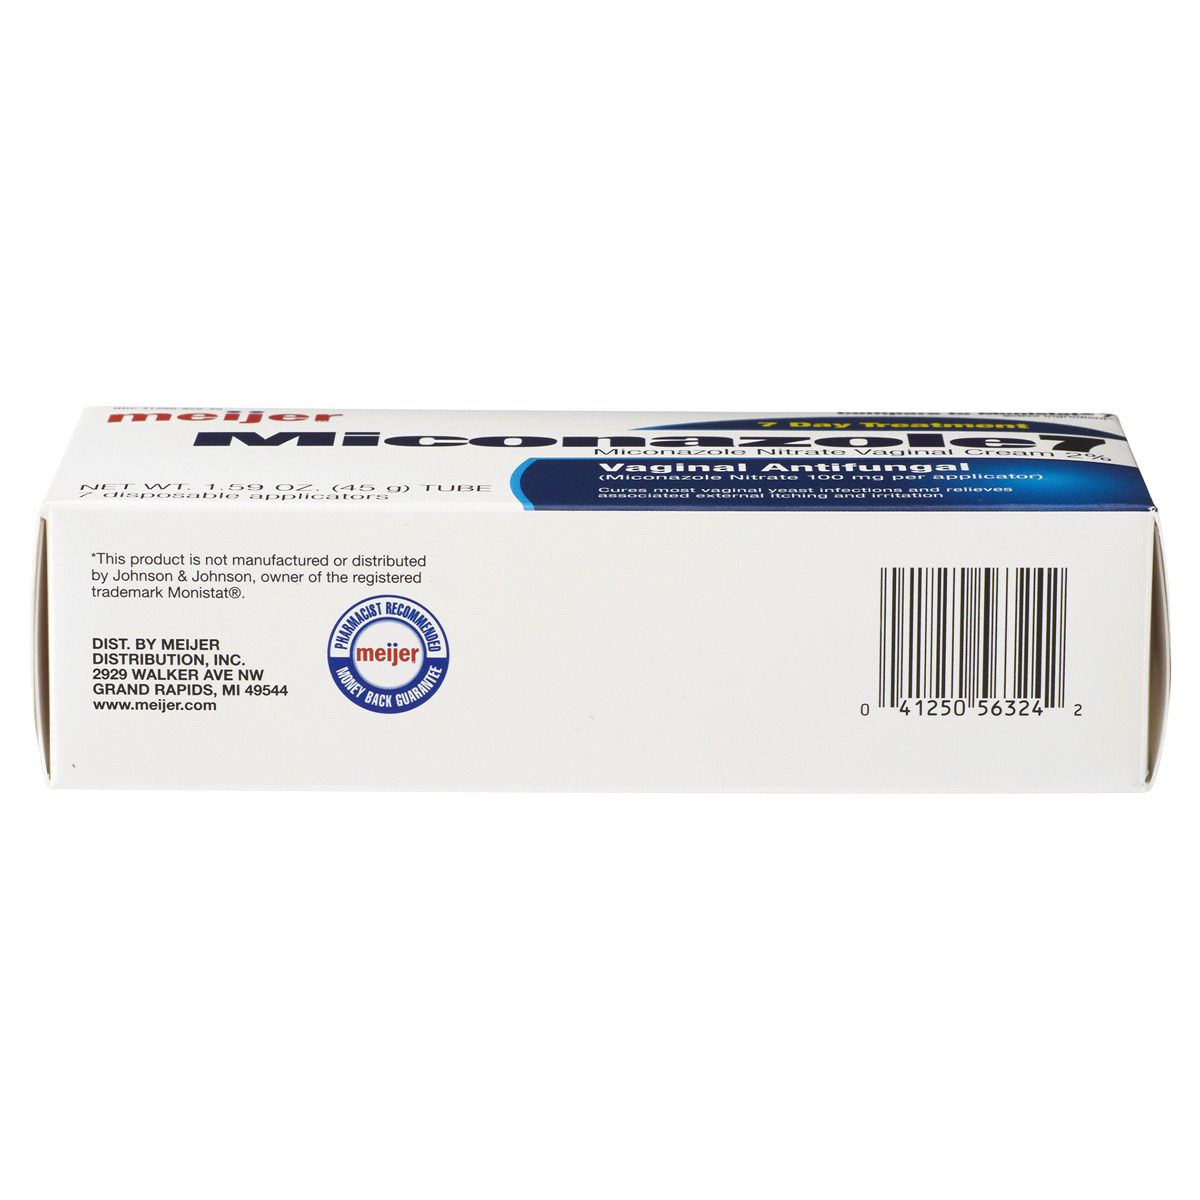 slide 3 of 4, Meijer Miconazole 7 Combo Pack: Disposable Applicators, 1 ct